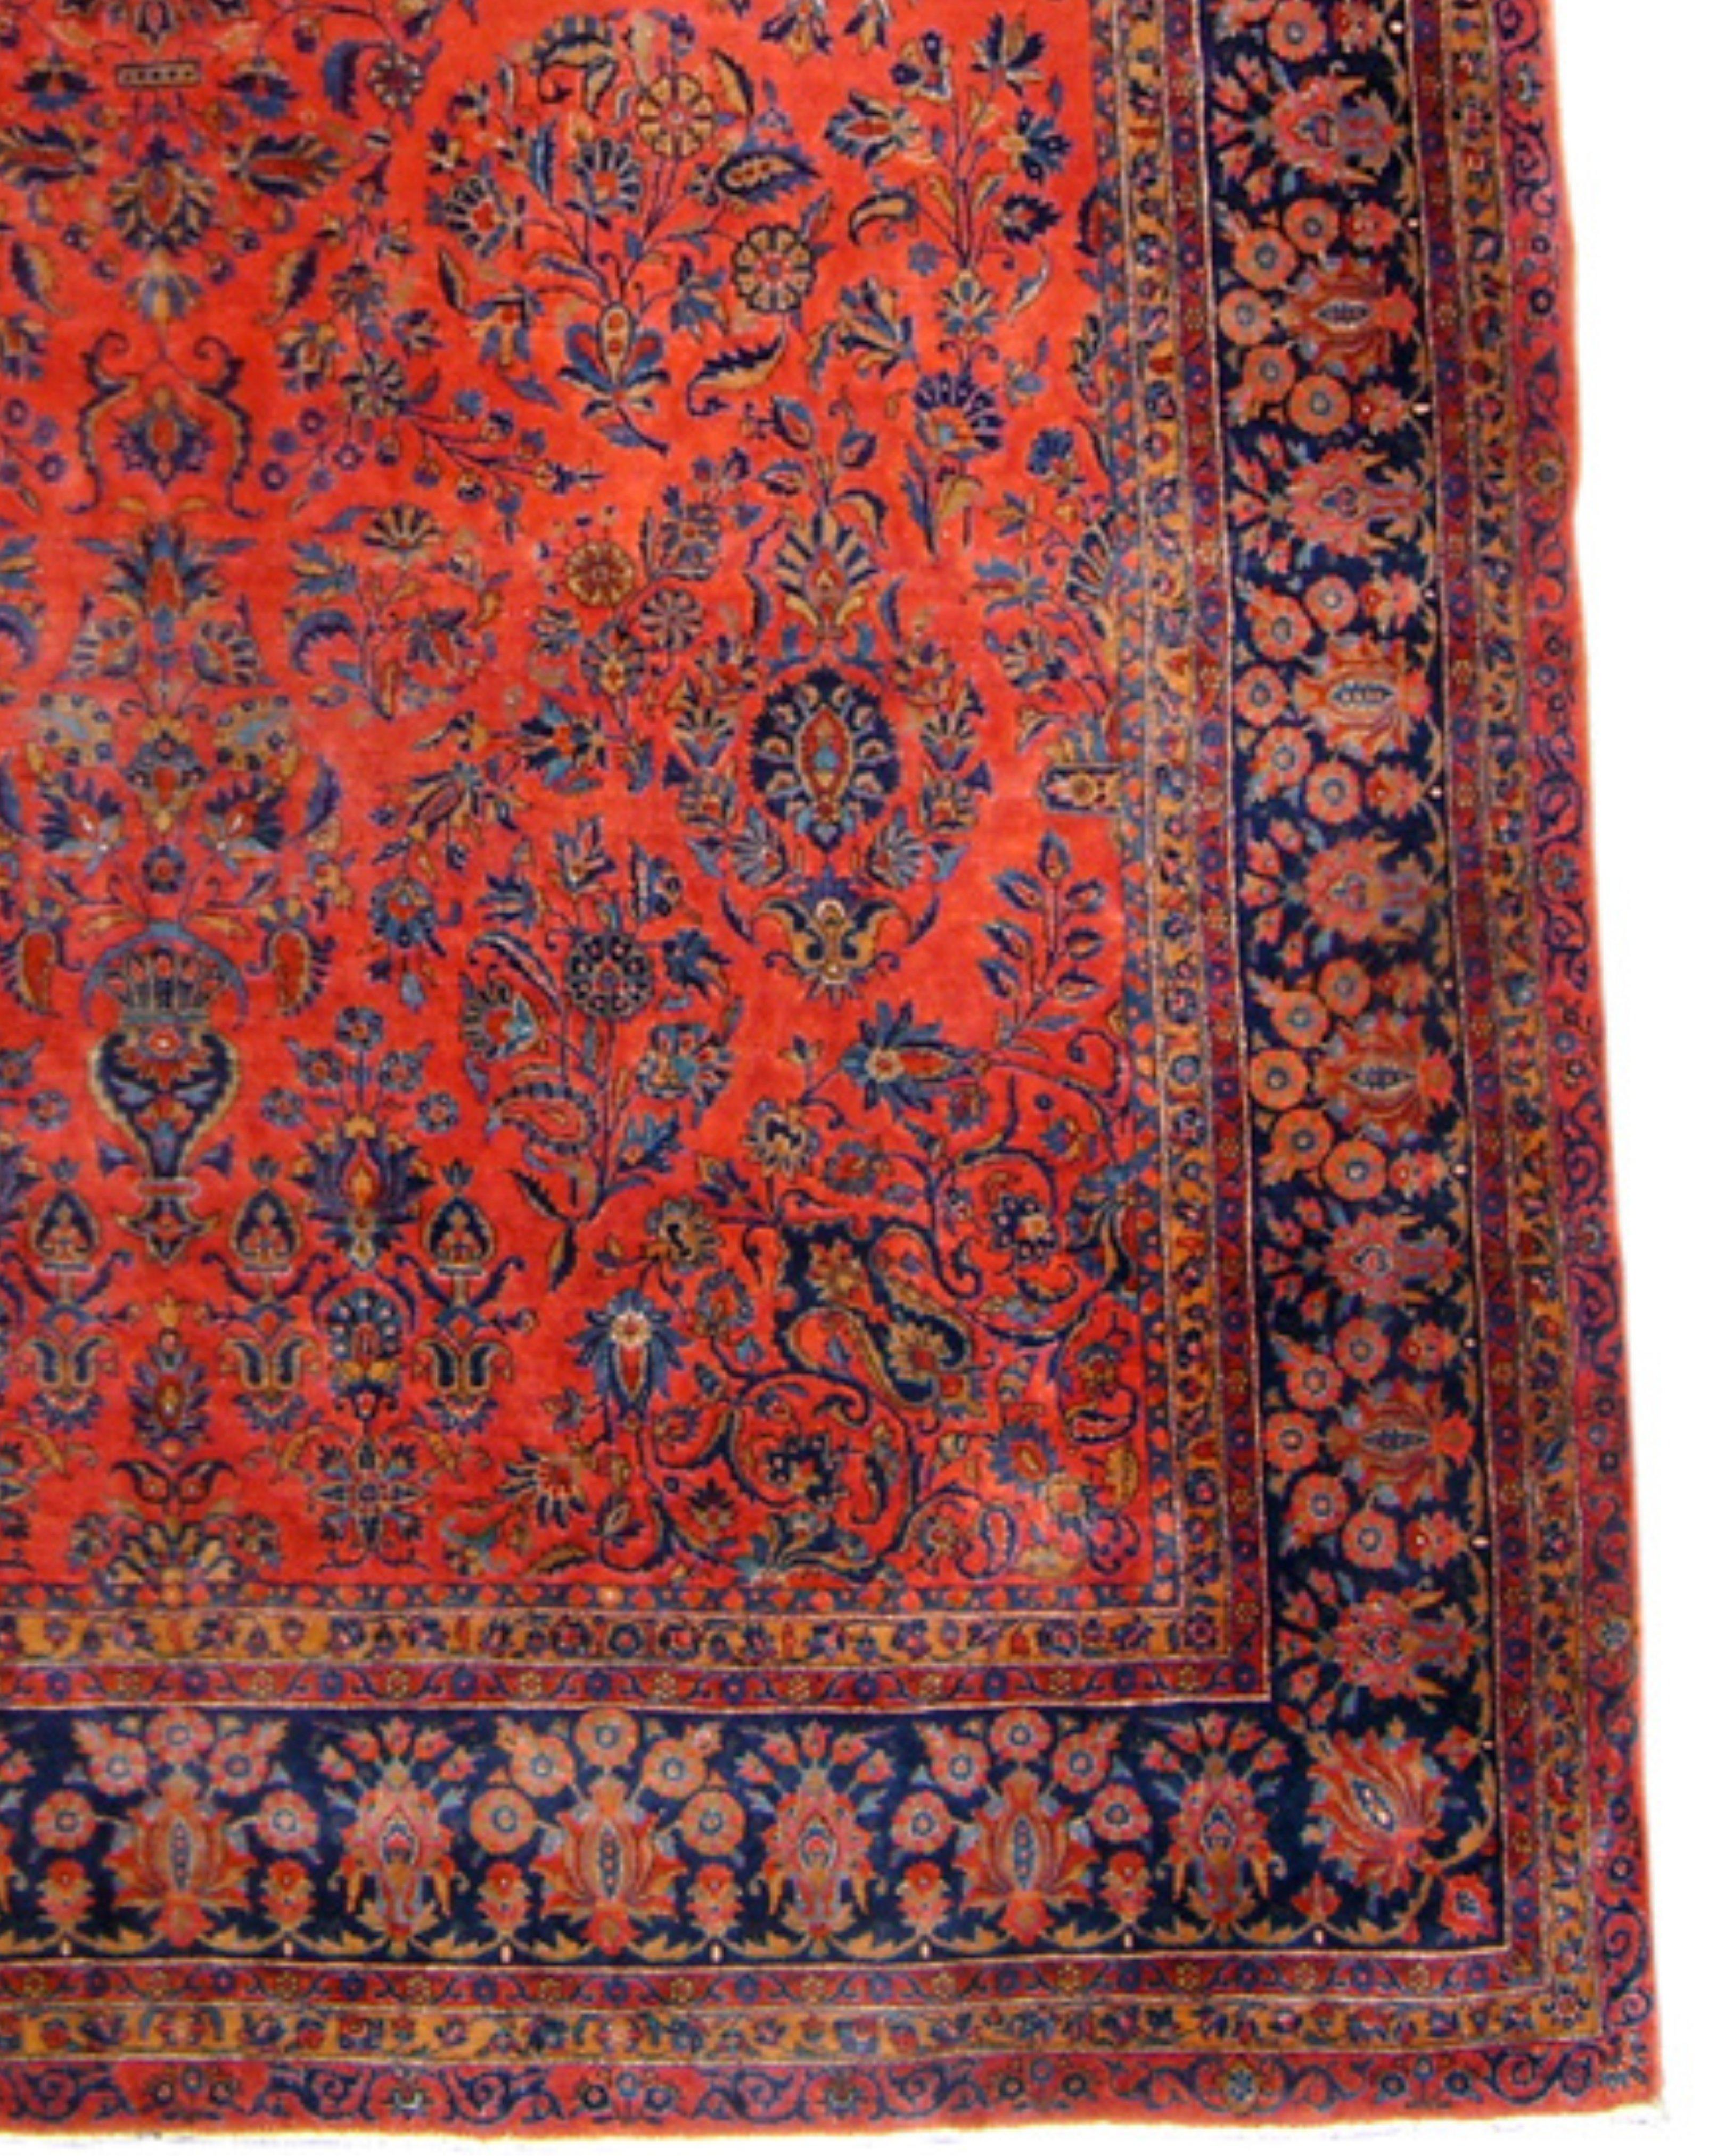 Kashan Rug 14986, Early 20th Century

This classic early twentieth-century Kashan carpet paints springs of flowers either emanating from pots, clustered around stylized palmettes, or arranged in individual bunches. While the initial impression the